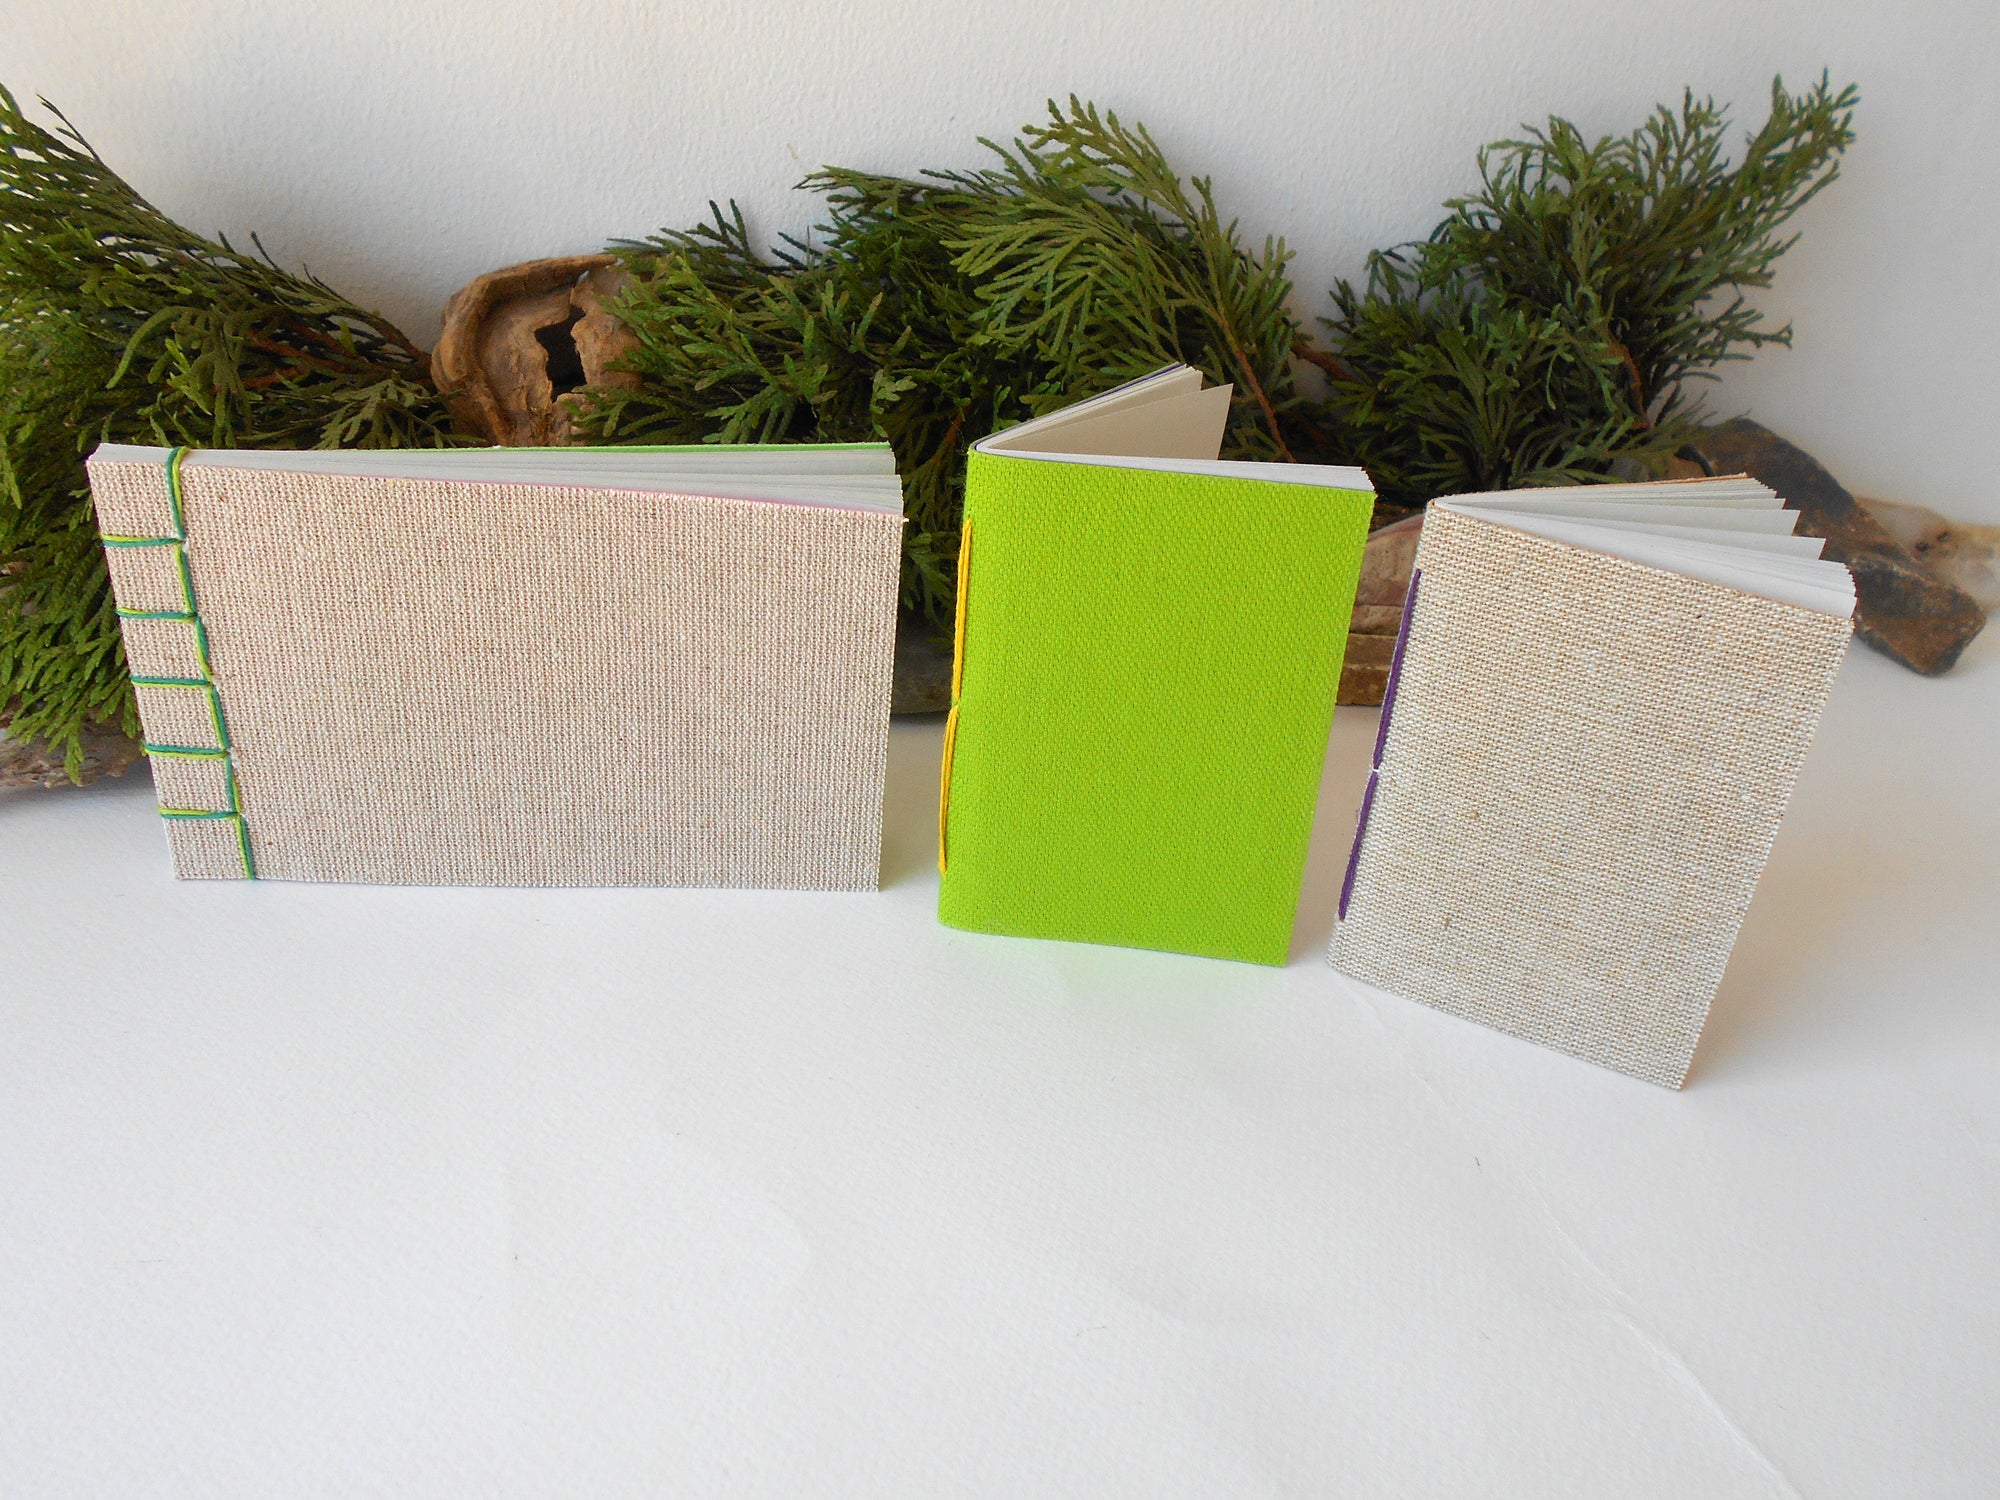 Handmade notebook set of 3 small blank books- eco-friendly linen fabrics pocket journals- Hemp cord binding and 100% recycled pages